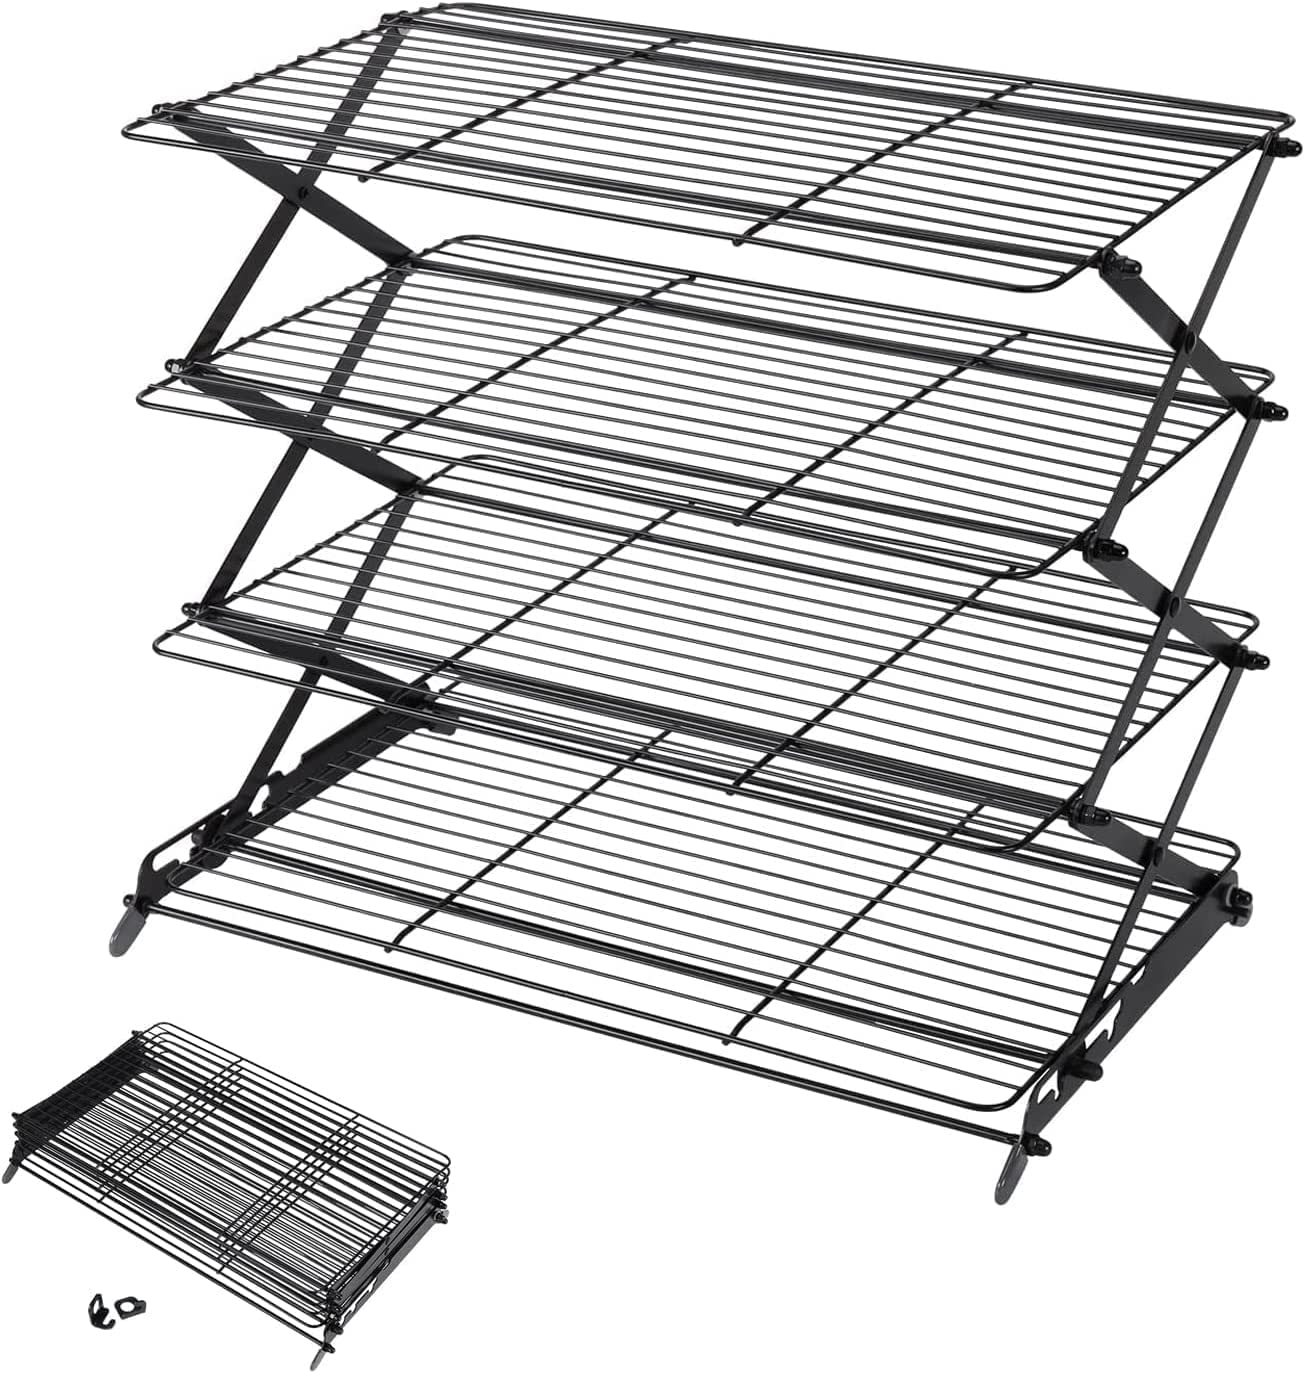  Nordic Ware 43343 Oven Safe Nonstick Baking & Cooling Grid (1/2  Sheet), One Size, Steel: Home & Kitchen